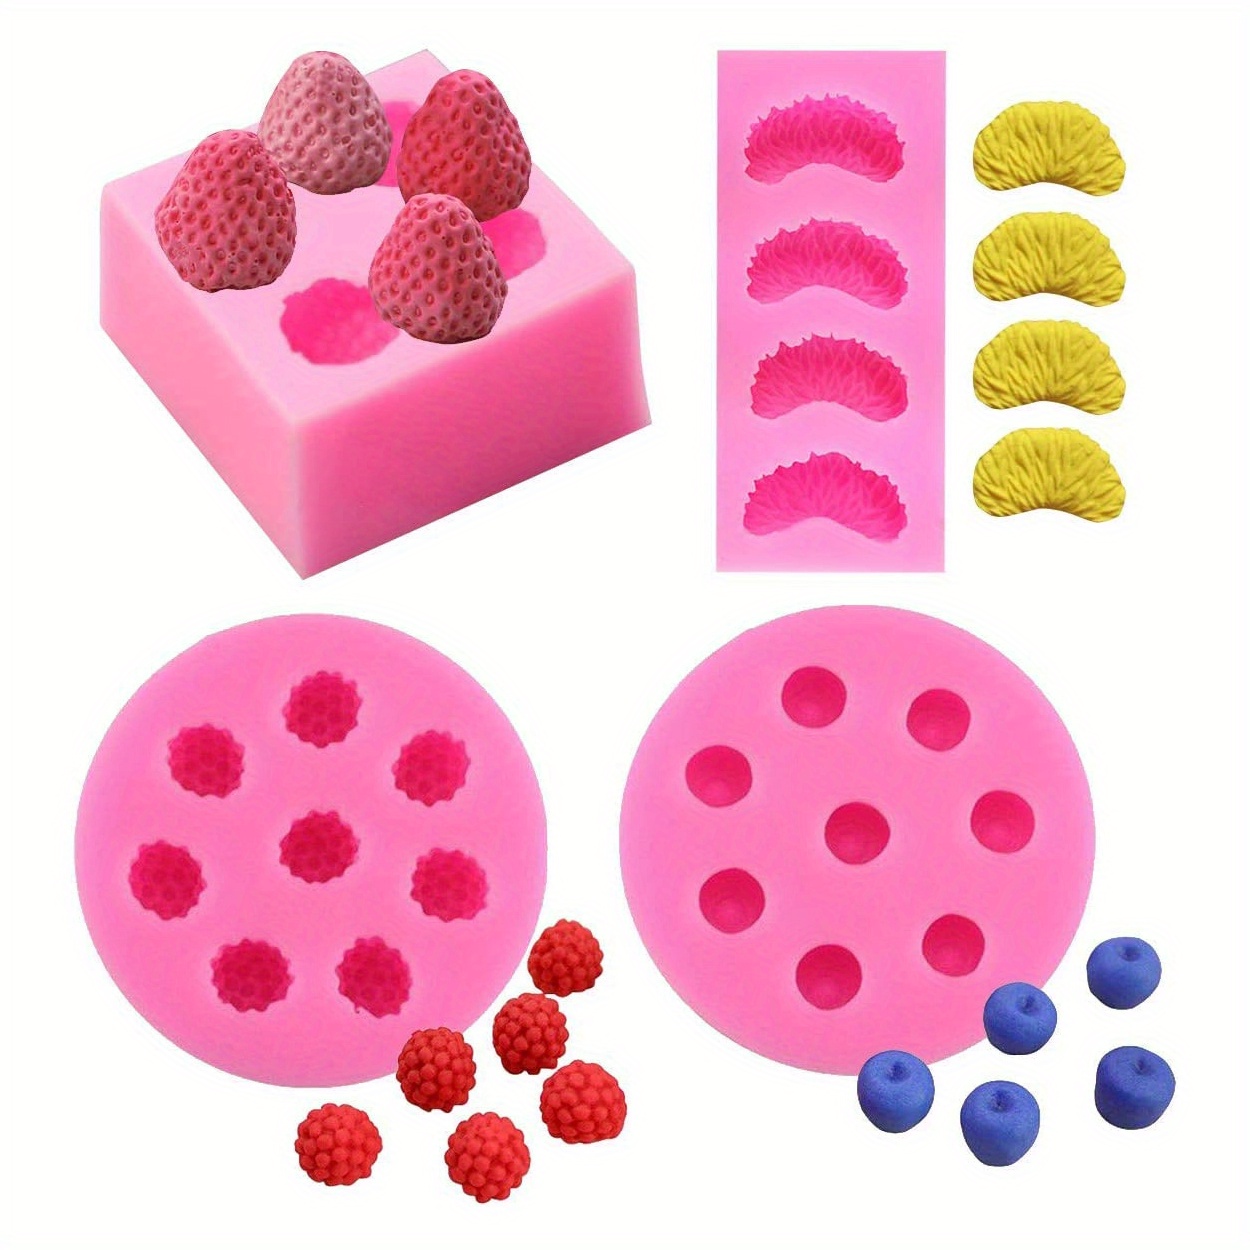 2 Pieces 3D Strawberry Silicone Mold,Food Grade Safety Silicon